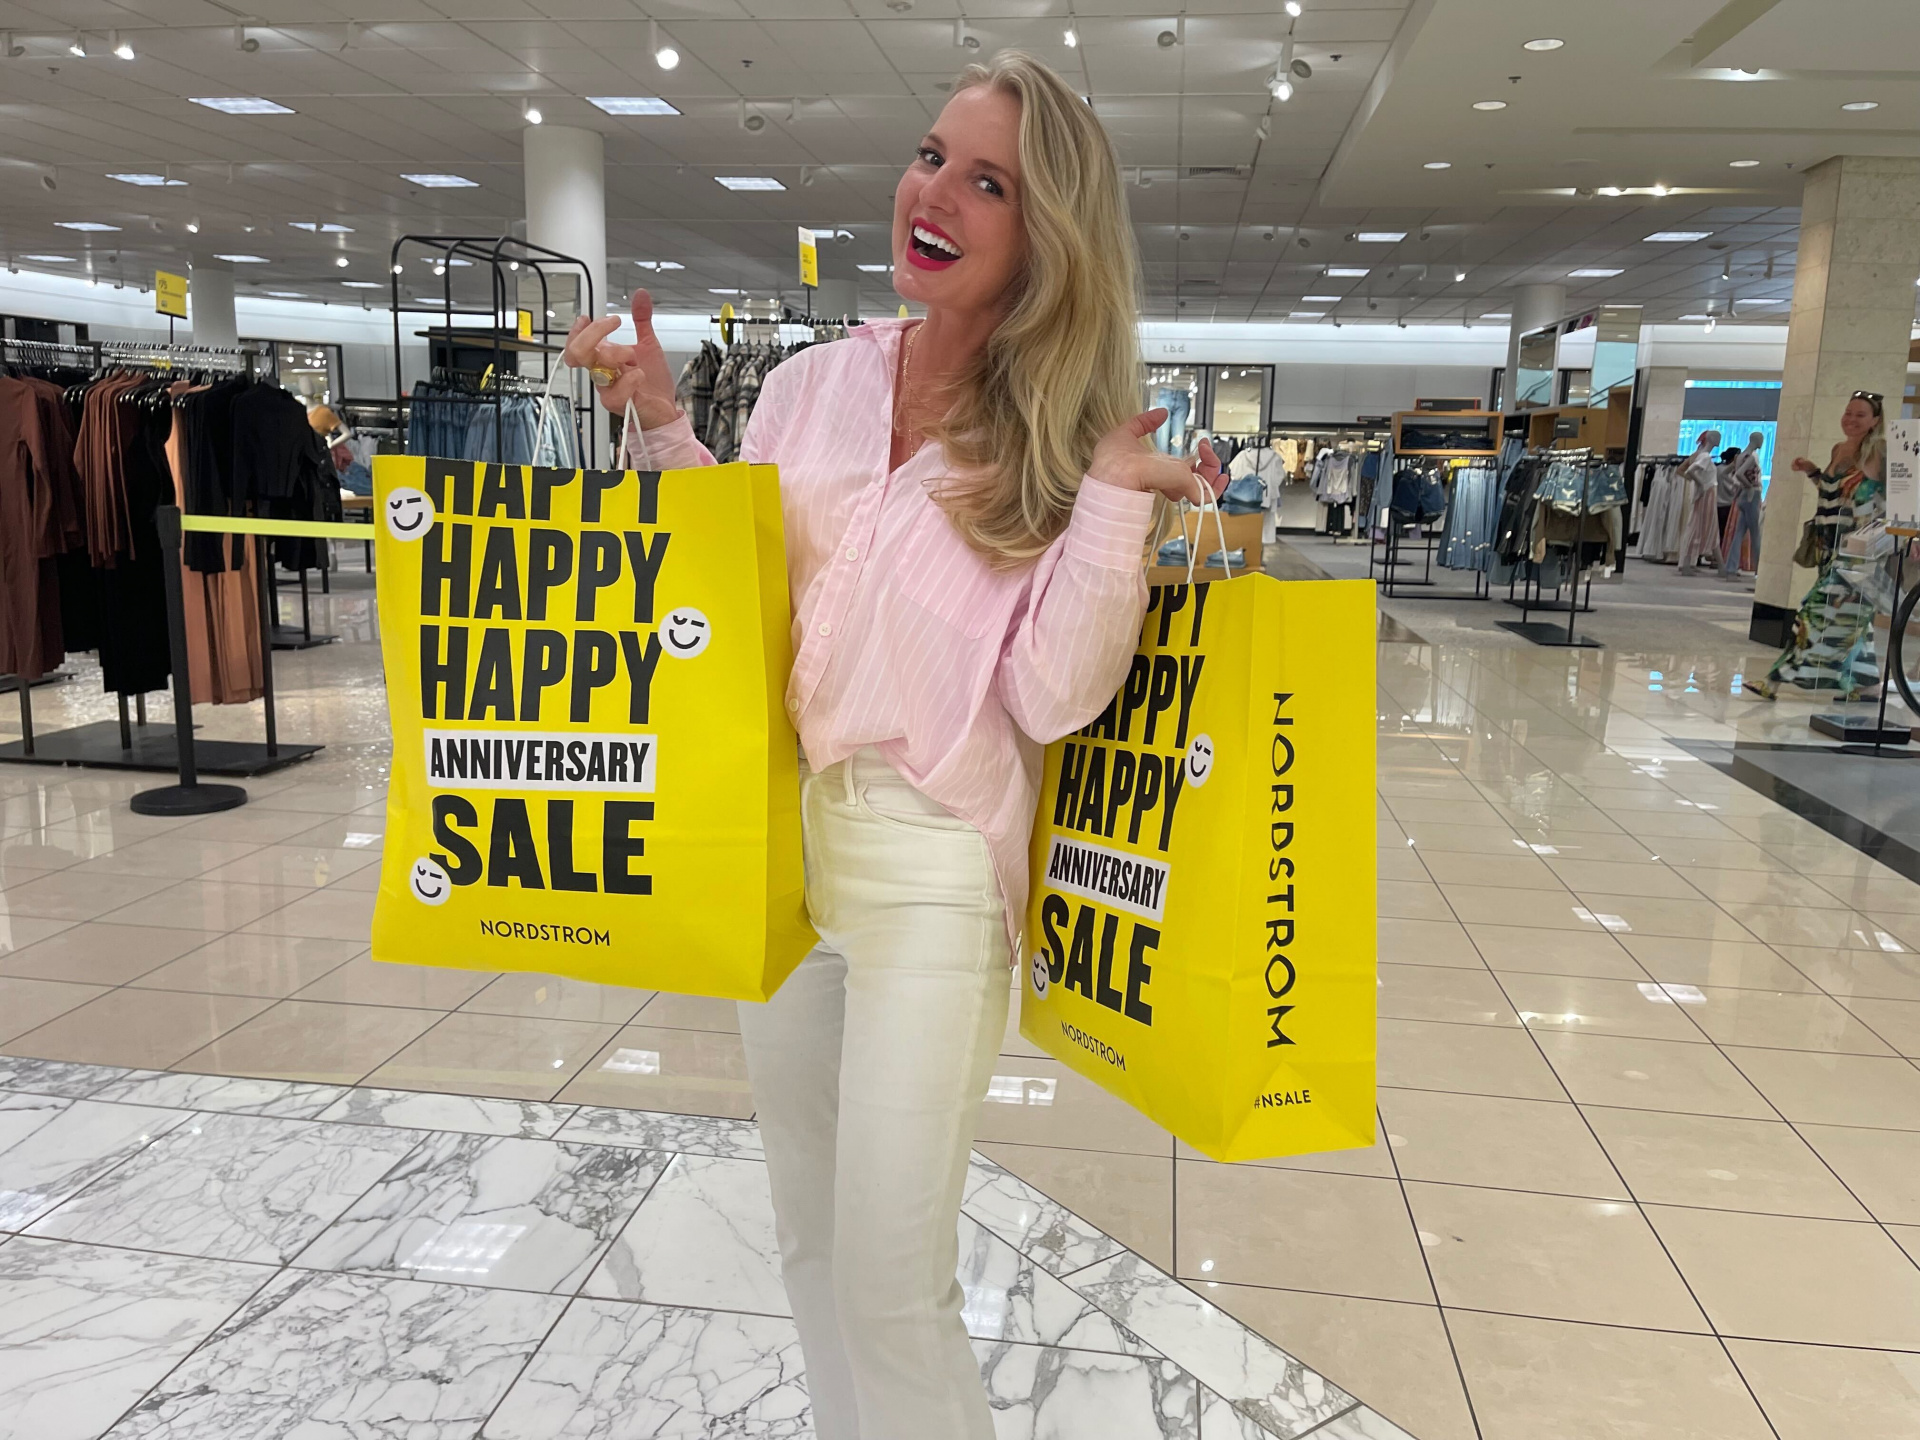 nordstrom anniversary sale, nordstrom anniversary sale 2022, nordstrom anniversary sale catalog, nordstrom anniversary sale favorites, nordstrom anniversary sale must haves, nsale over 40, nordstrom anniversary sale over 40, what to buy at nordstrom anniversary sale, erin busbee, busbee style, fashion over 40